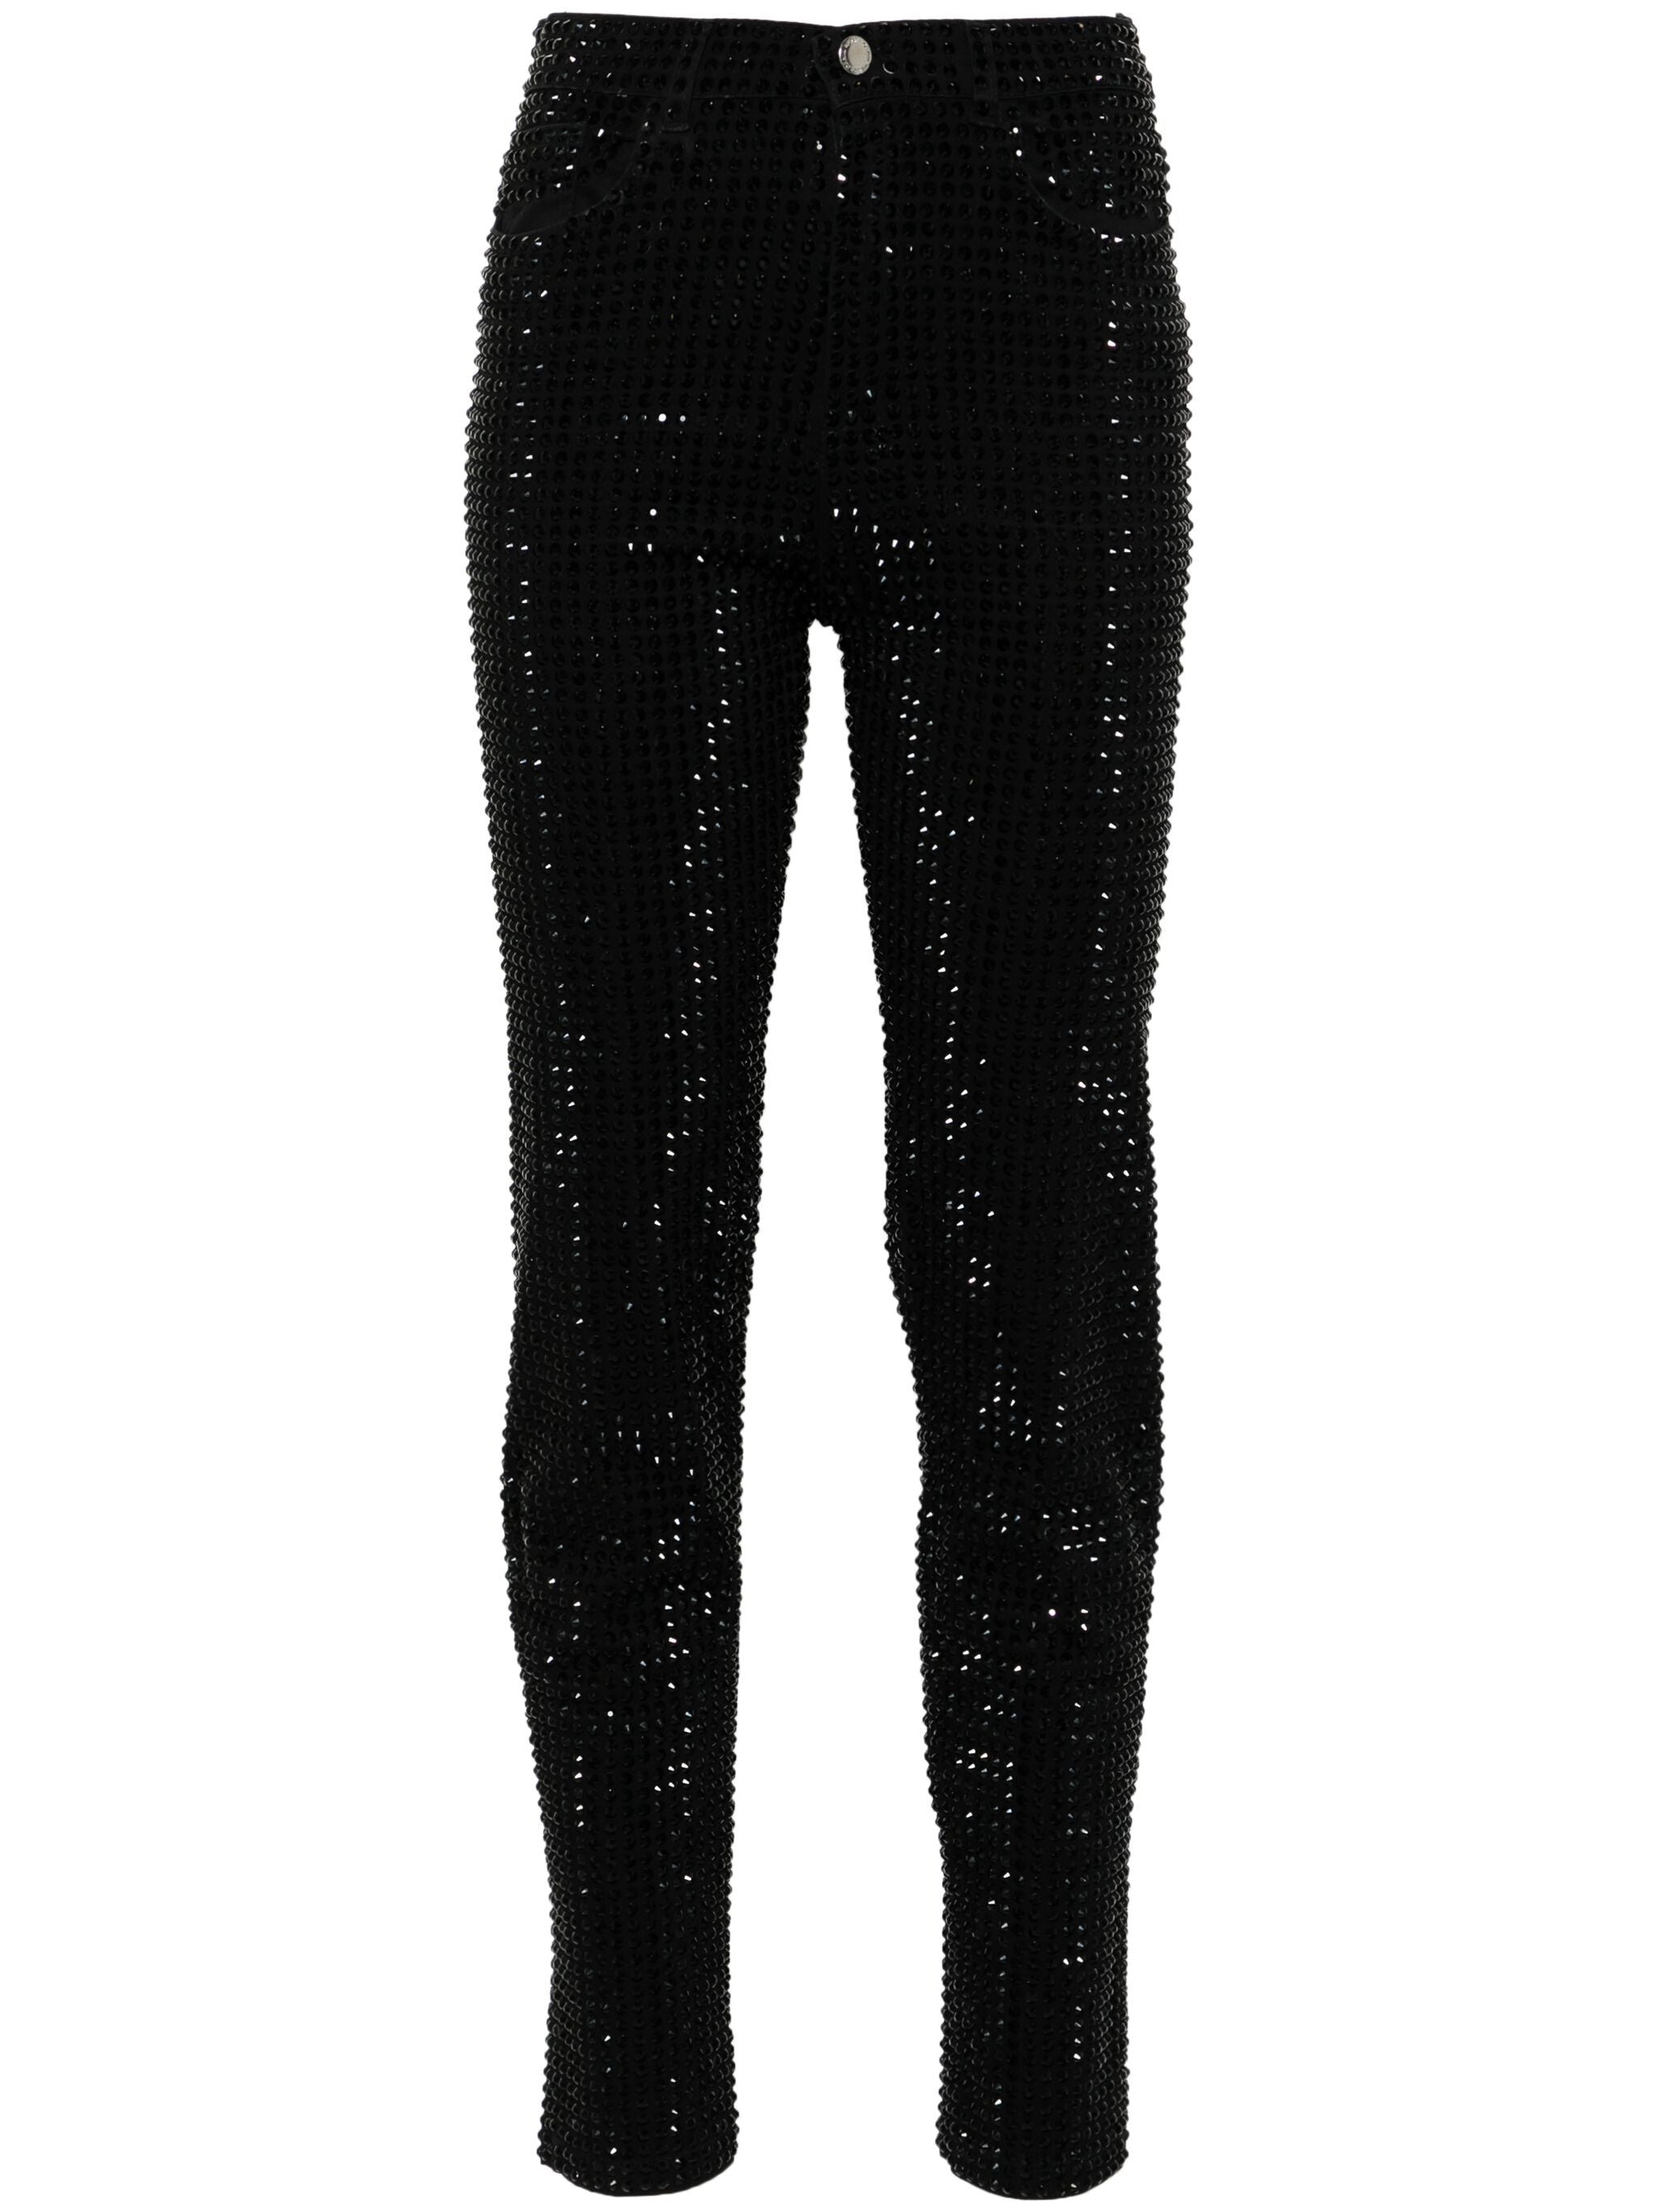 Crystal-embellished skinny trousers